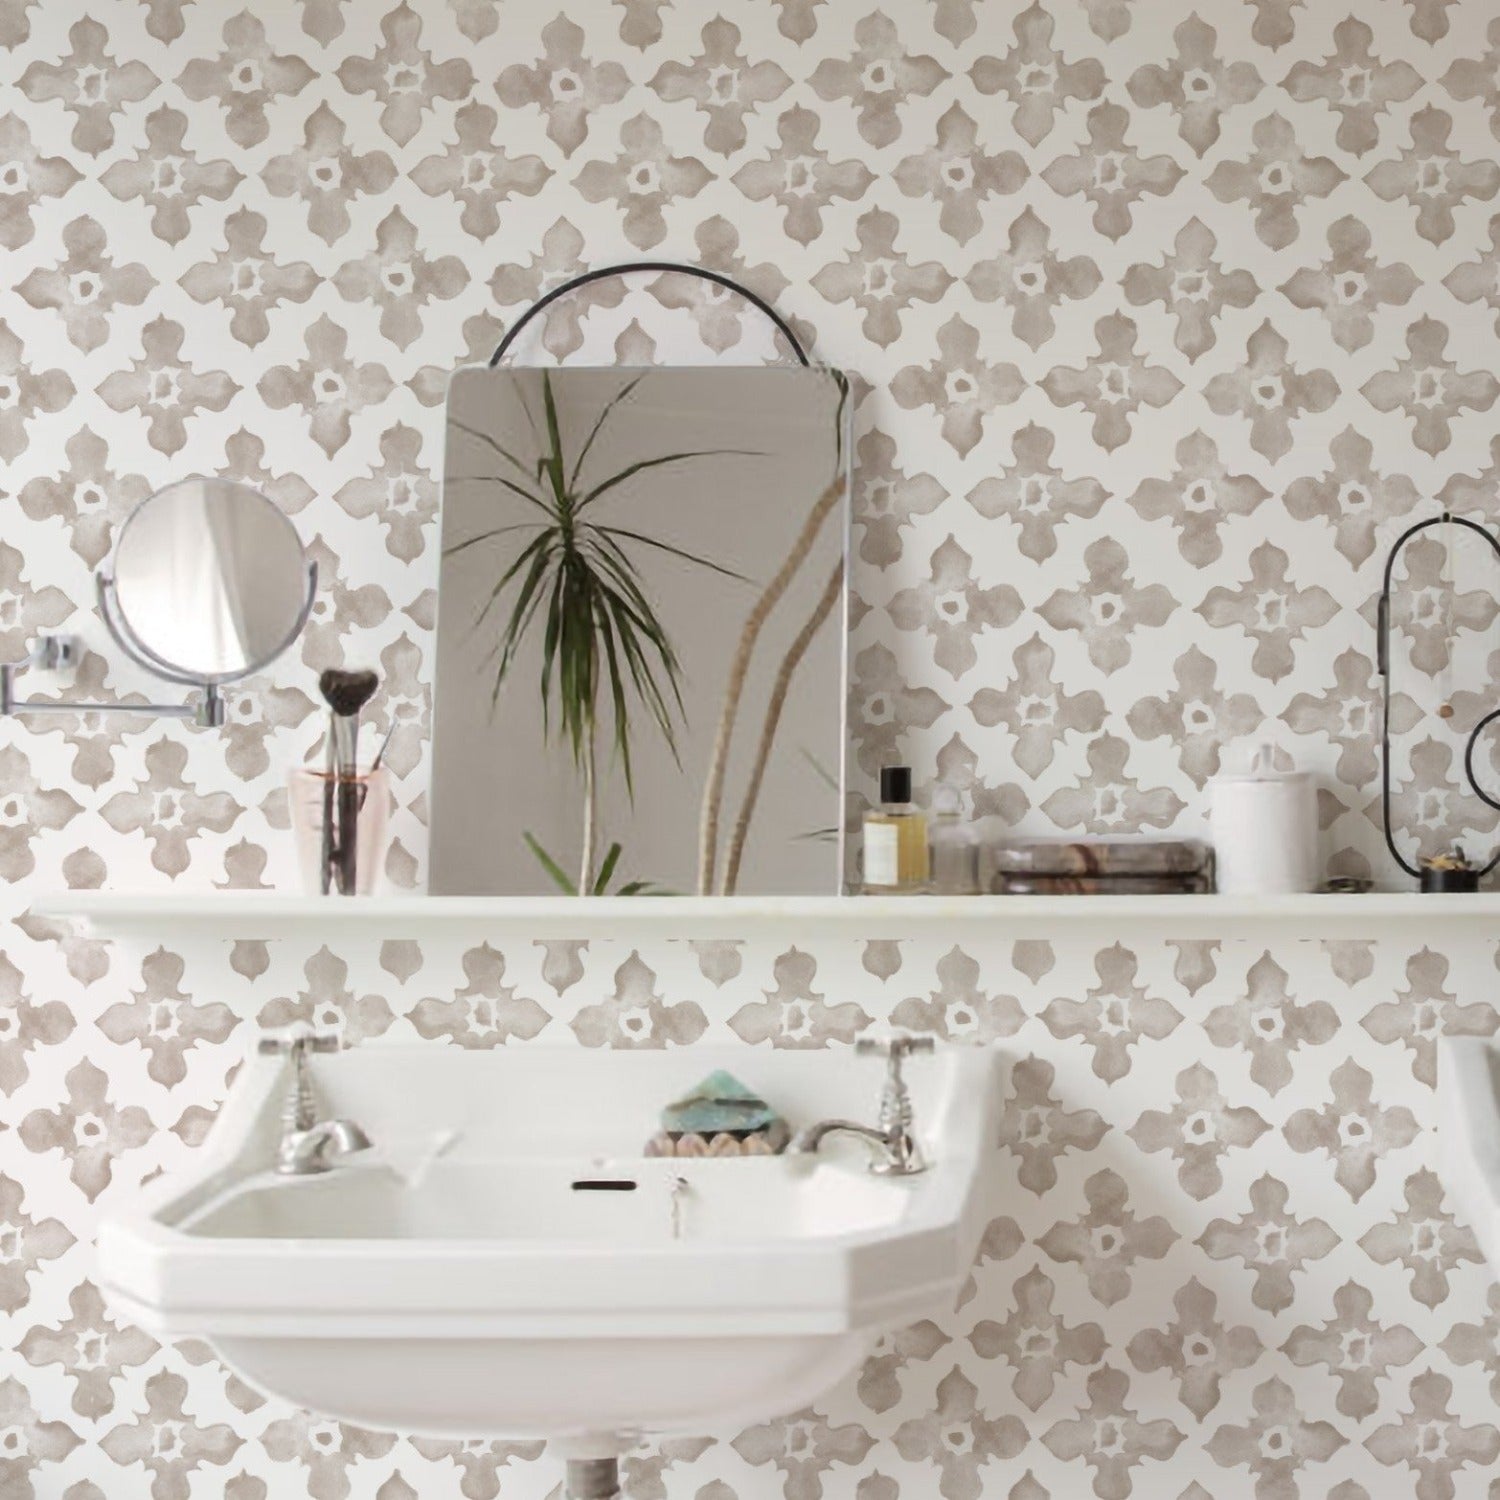 This bathroom interior features the "Moroccan Tile - Beige" wallpaper, with a classic beige and white Moroccan tile pattern that adds an air of sophistication and worldly charm. The wallpaper complements the white pedestal sink and the reflective surface of a rectangular mirror, alongside various bathroom accessories, creating a harmonious and elegant space.